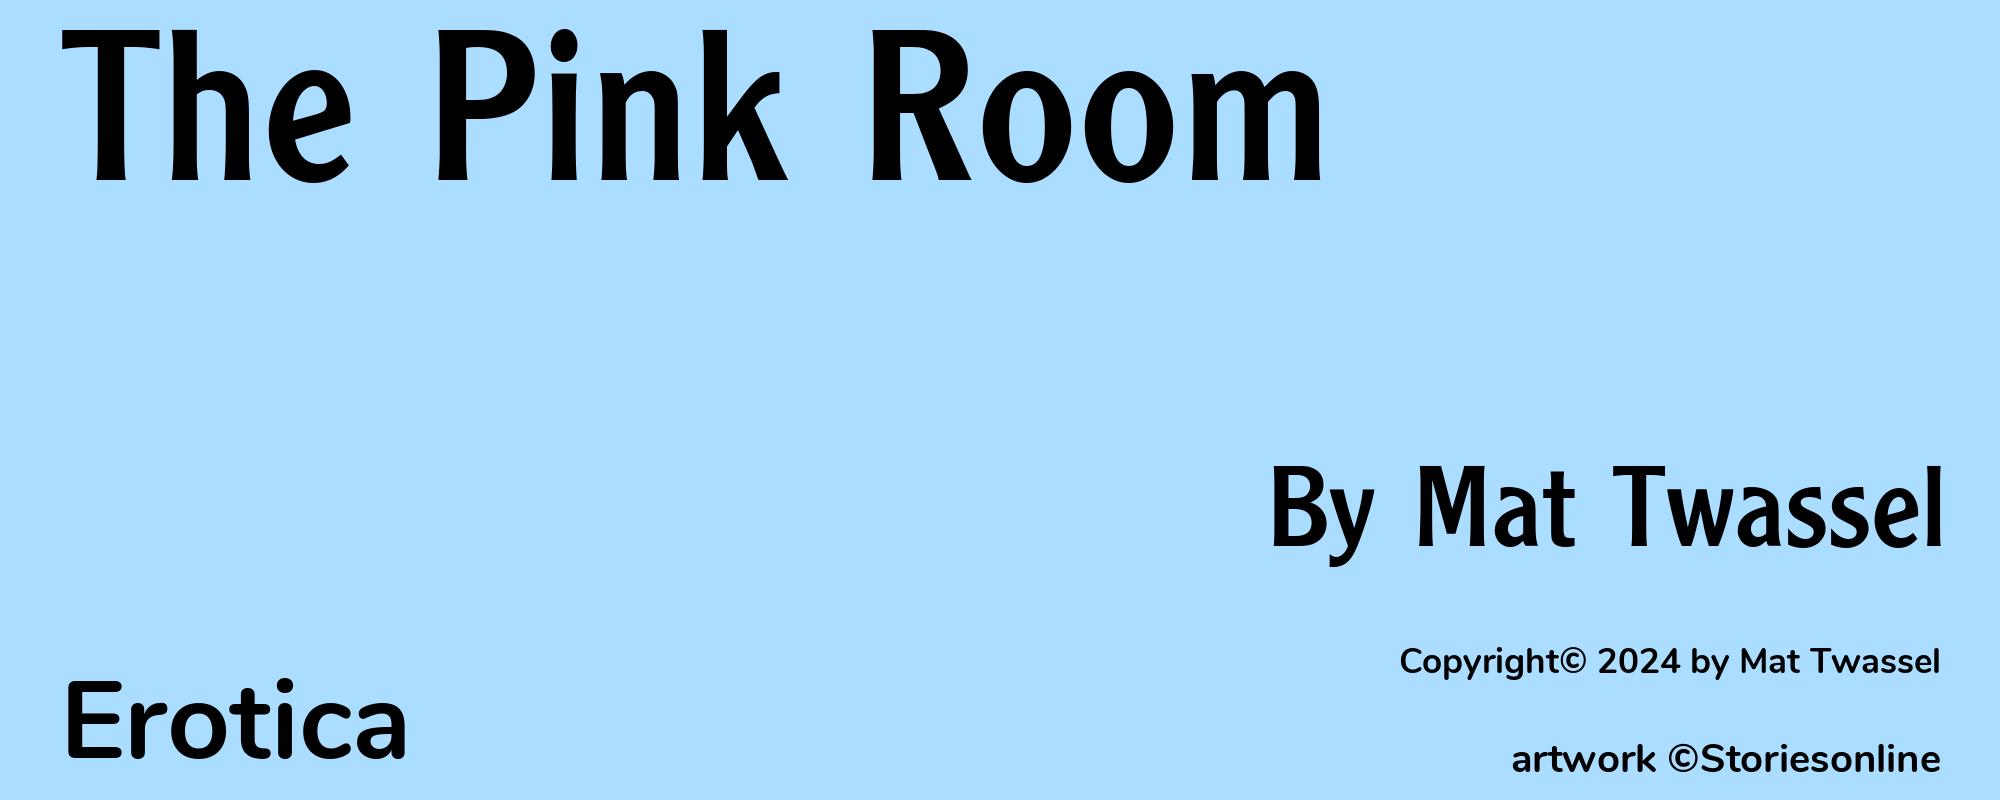 The Pink Room - Cover